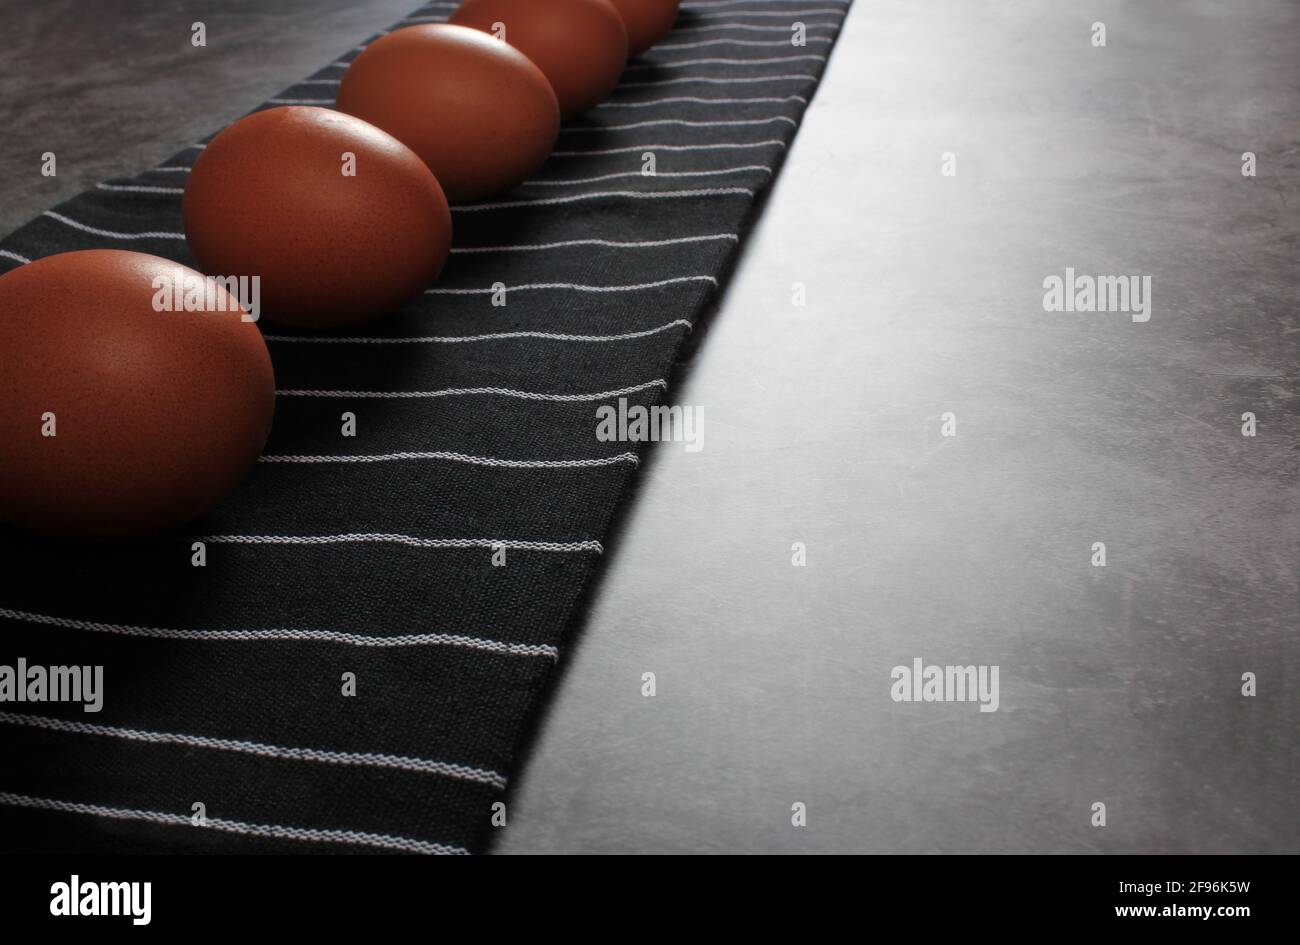 Easter concept. Eggs against black striped kitchen towel on dark background. Copy space. Close up. Stock Photo